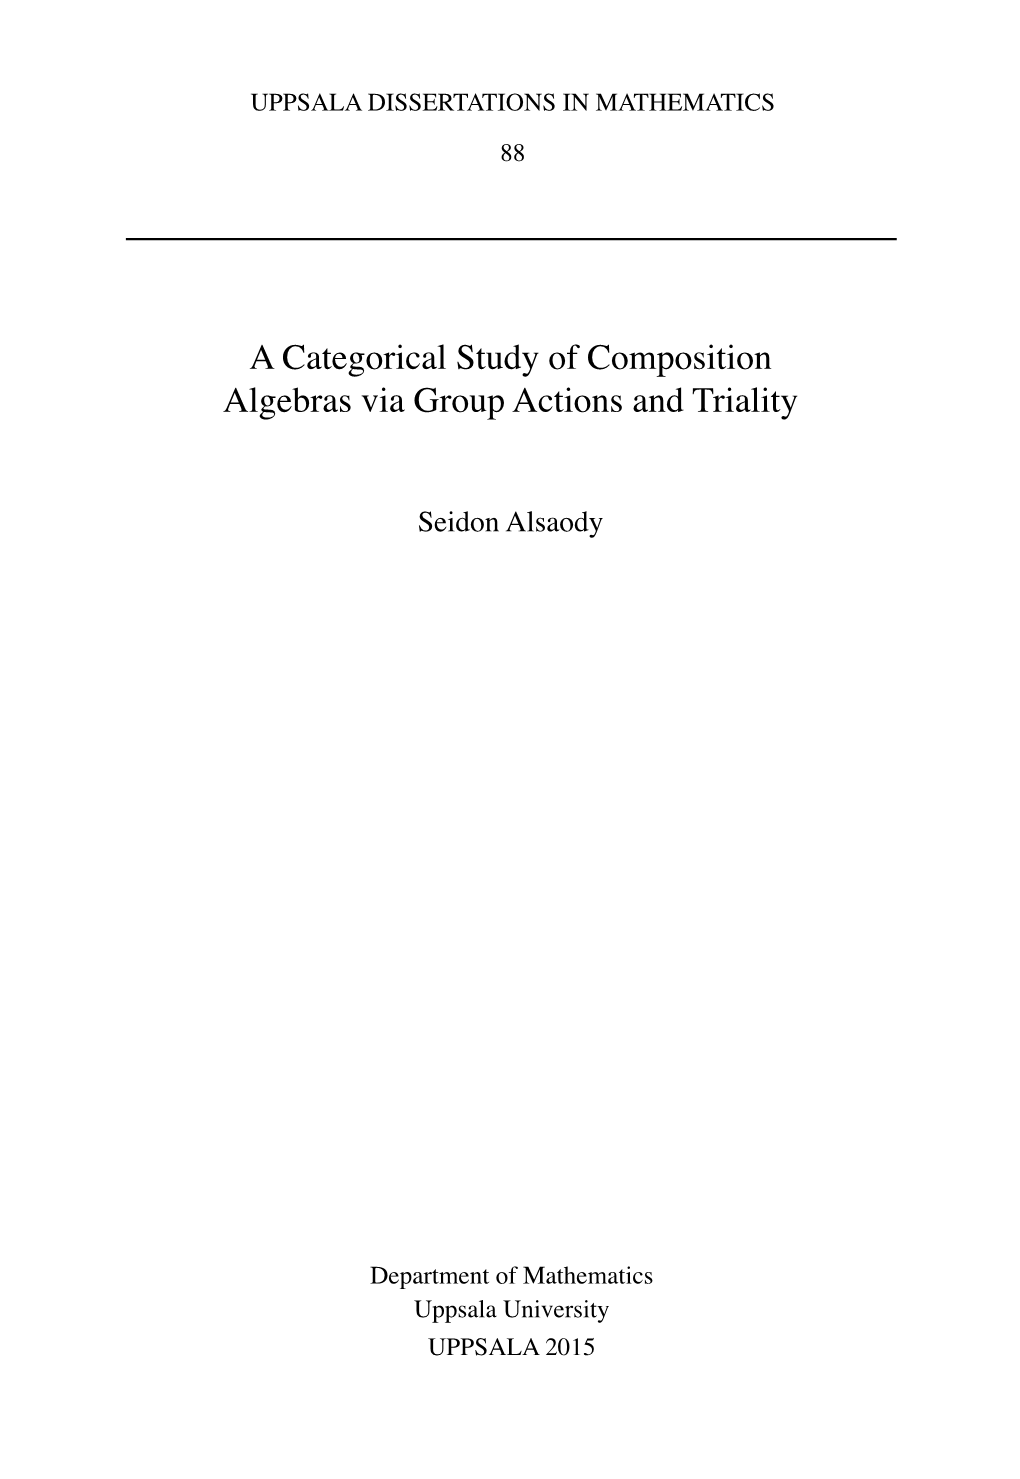 A Categorical Study of Composition Algebras Via Group Actions and Triality